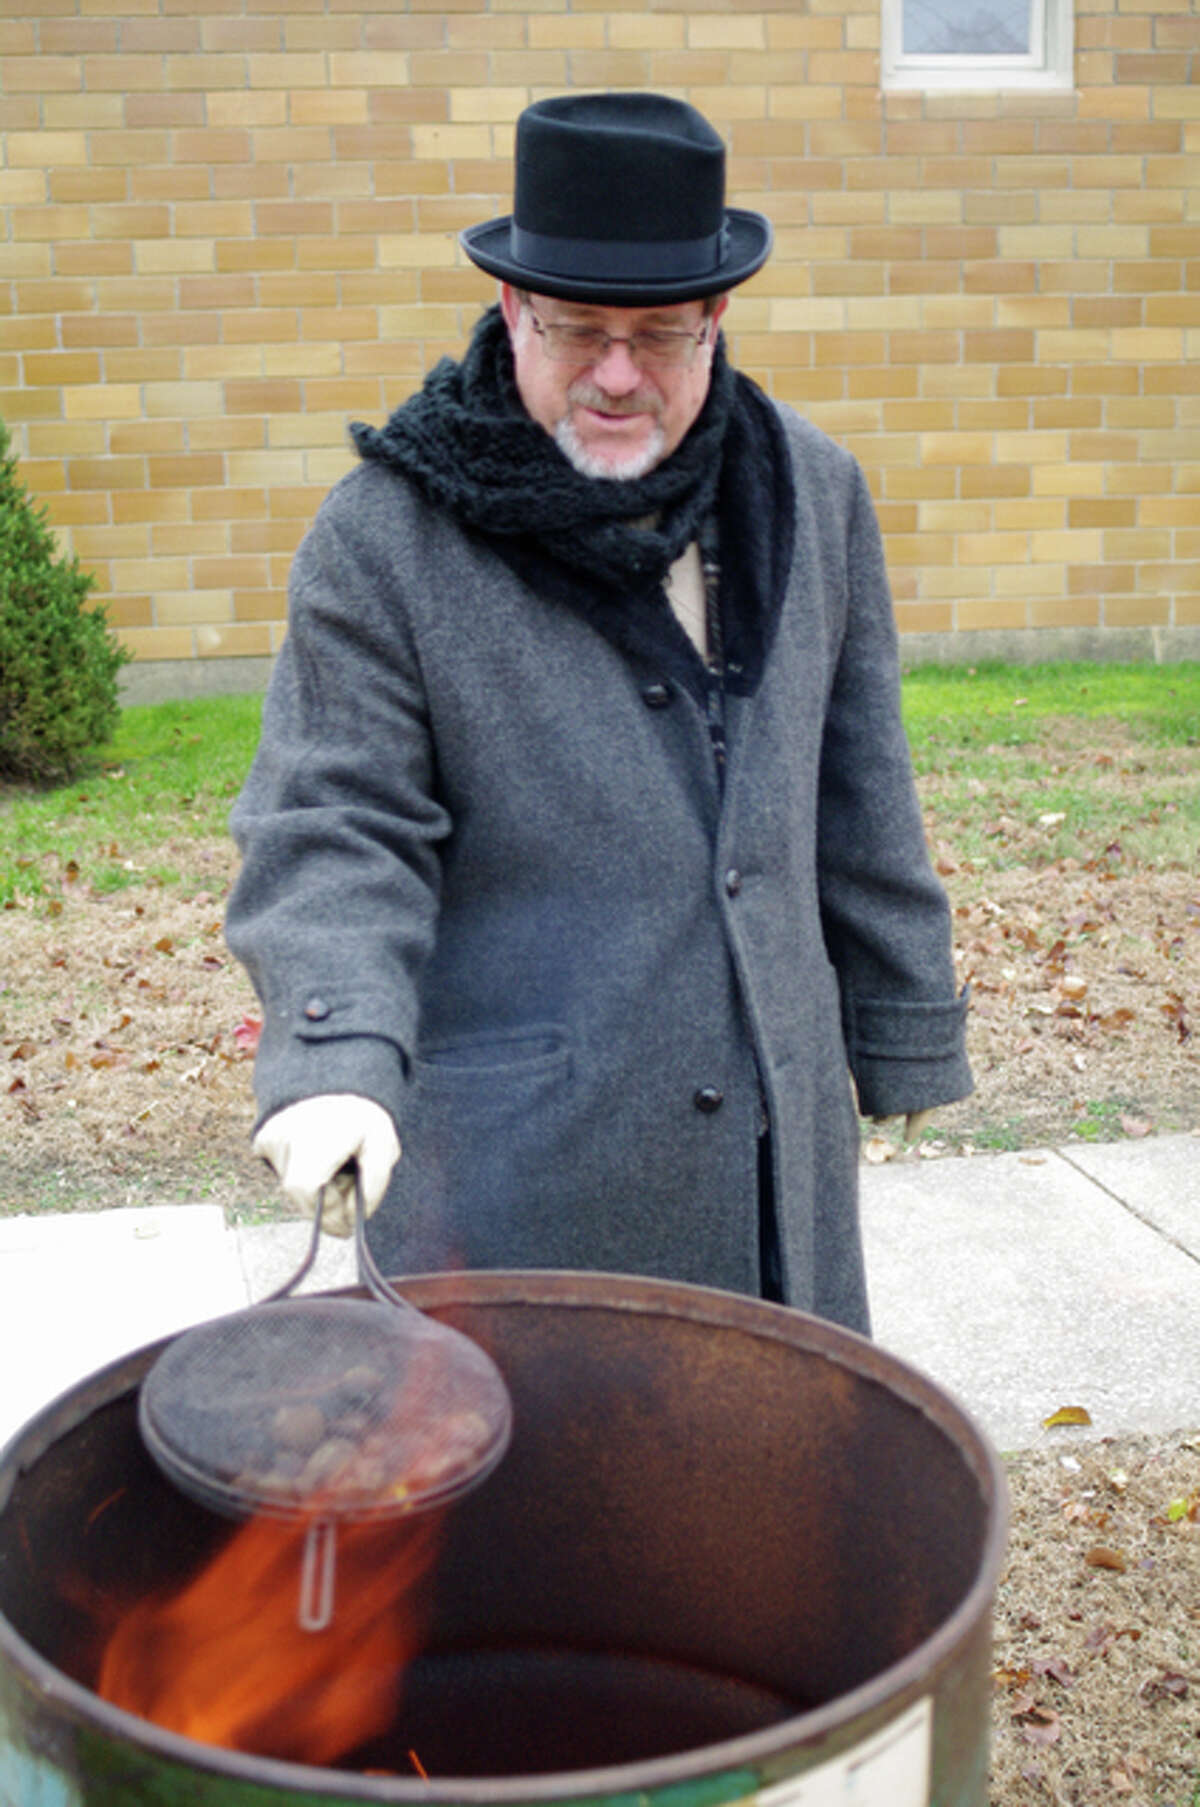 Rev. Willy Meyer roasts chestnuts over an open fire on behalf of the Kiwanis Club during Sunday’s 26th annual Christmas Walk in Downtown Bethalto.